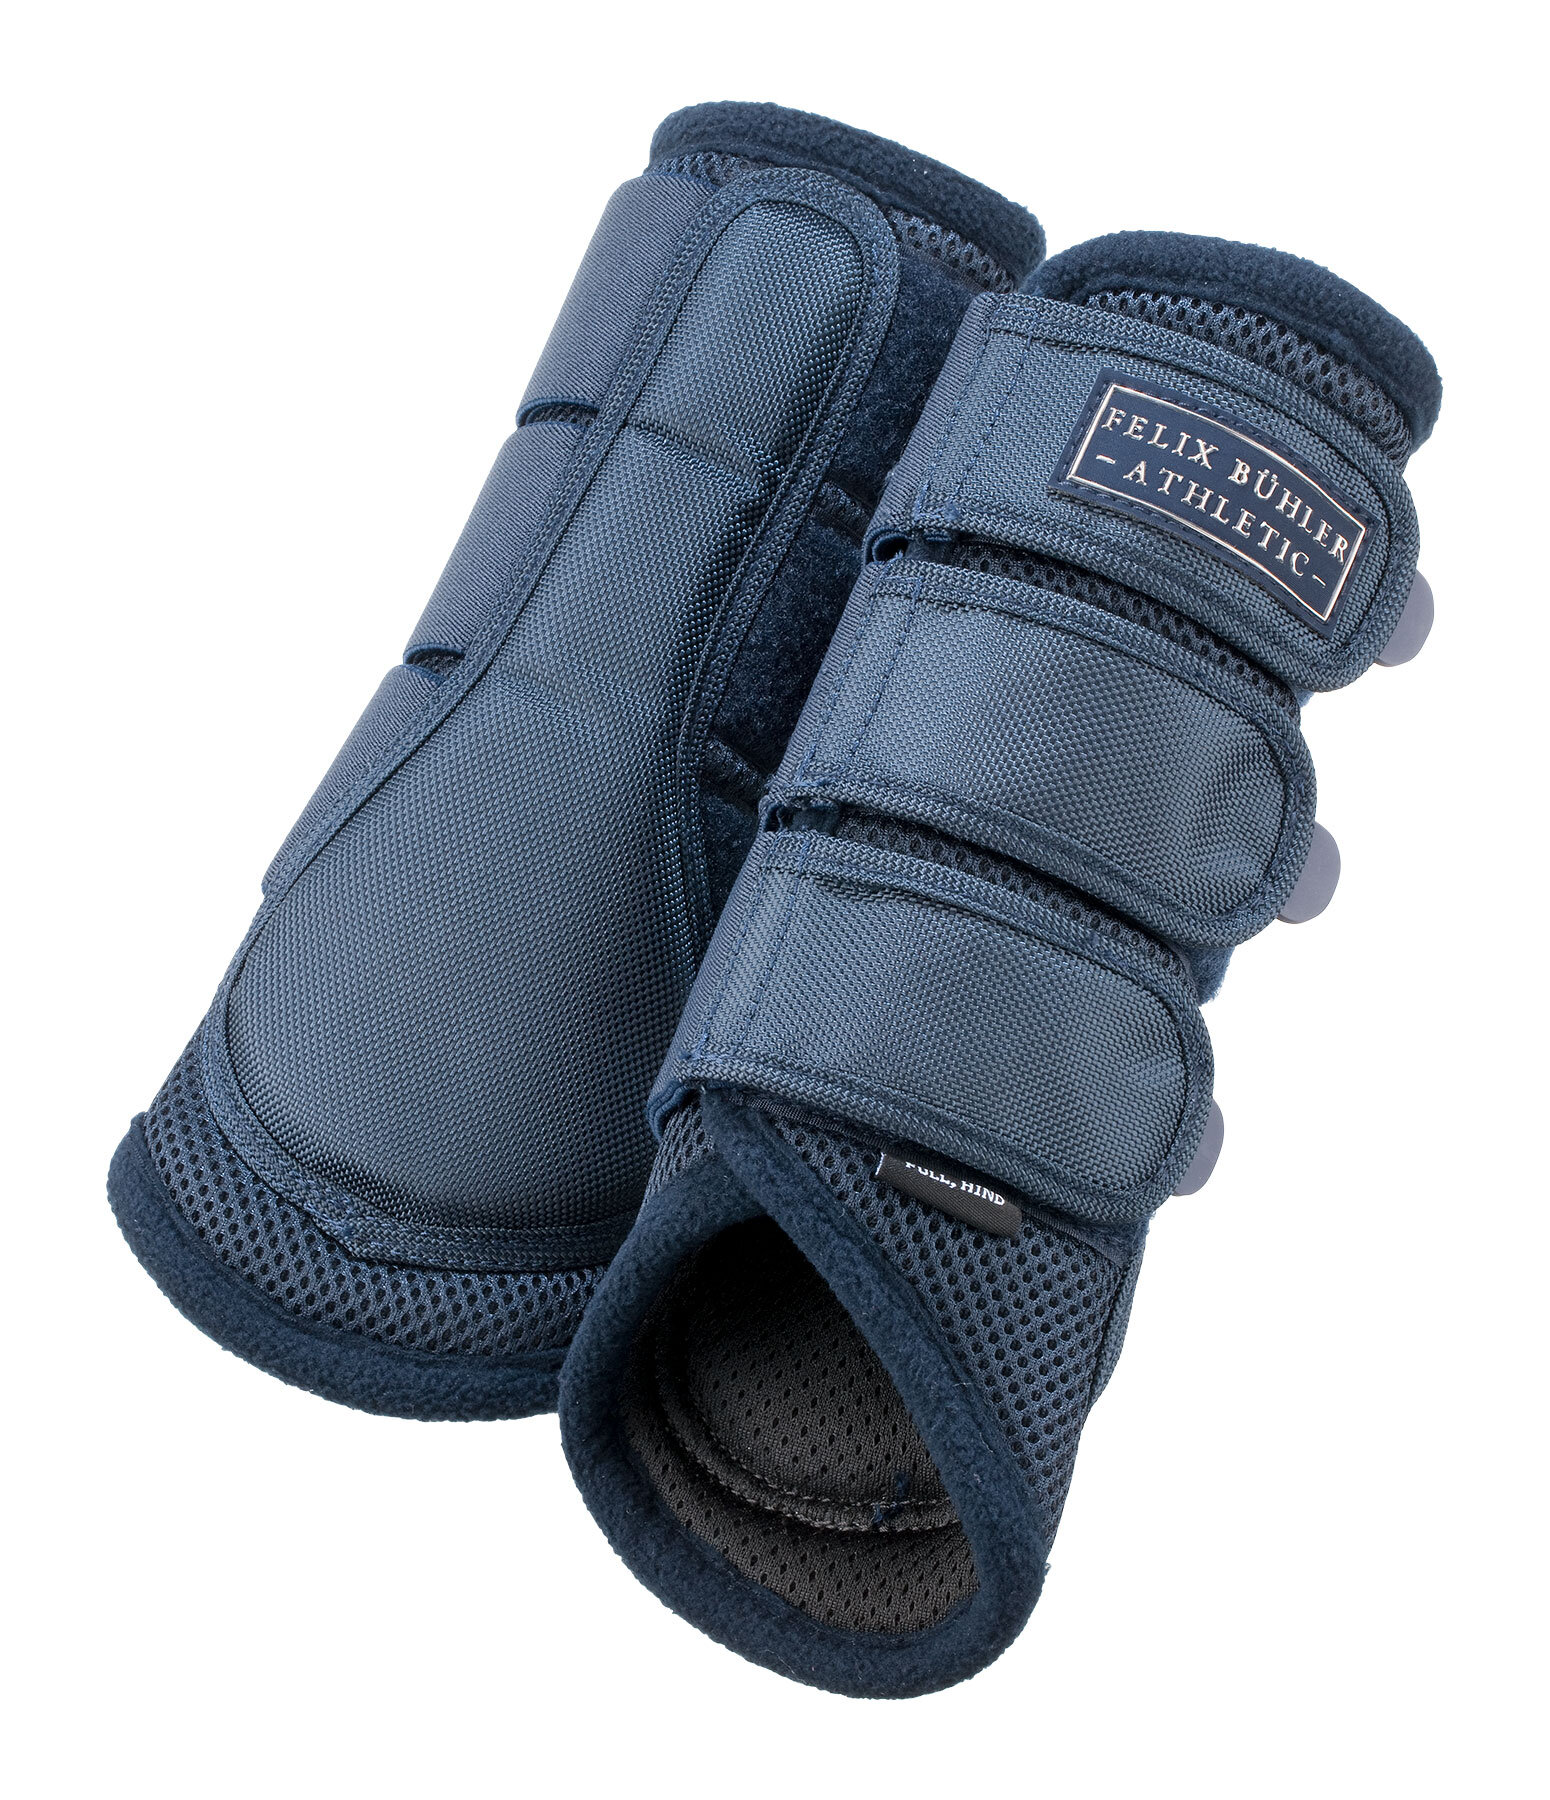 Functional Boots Athletic, Hind Legs